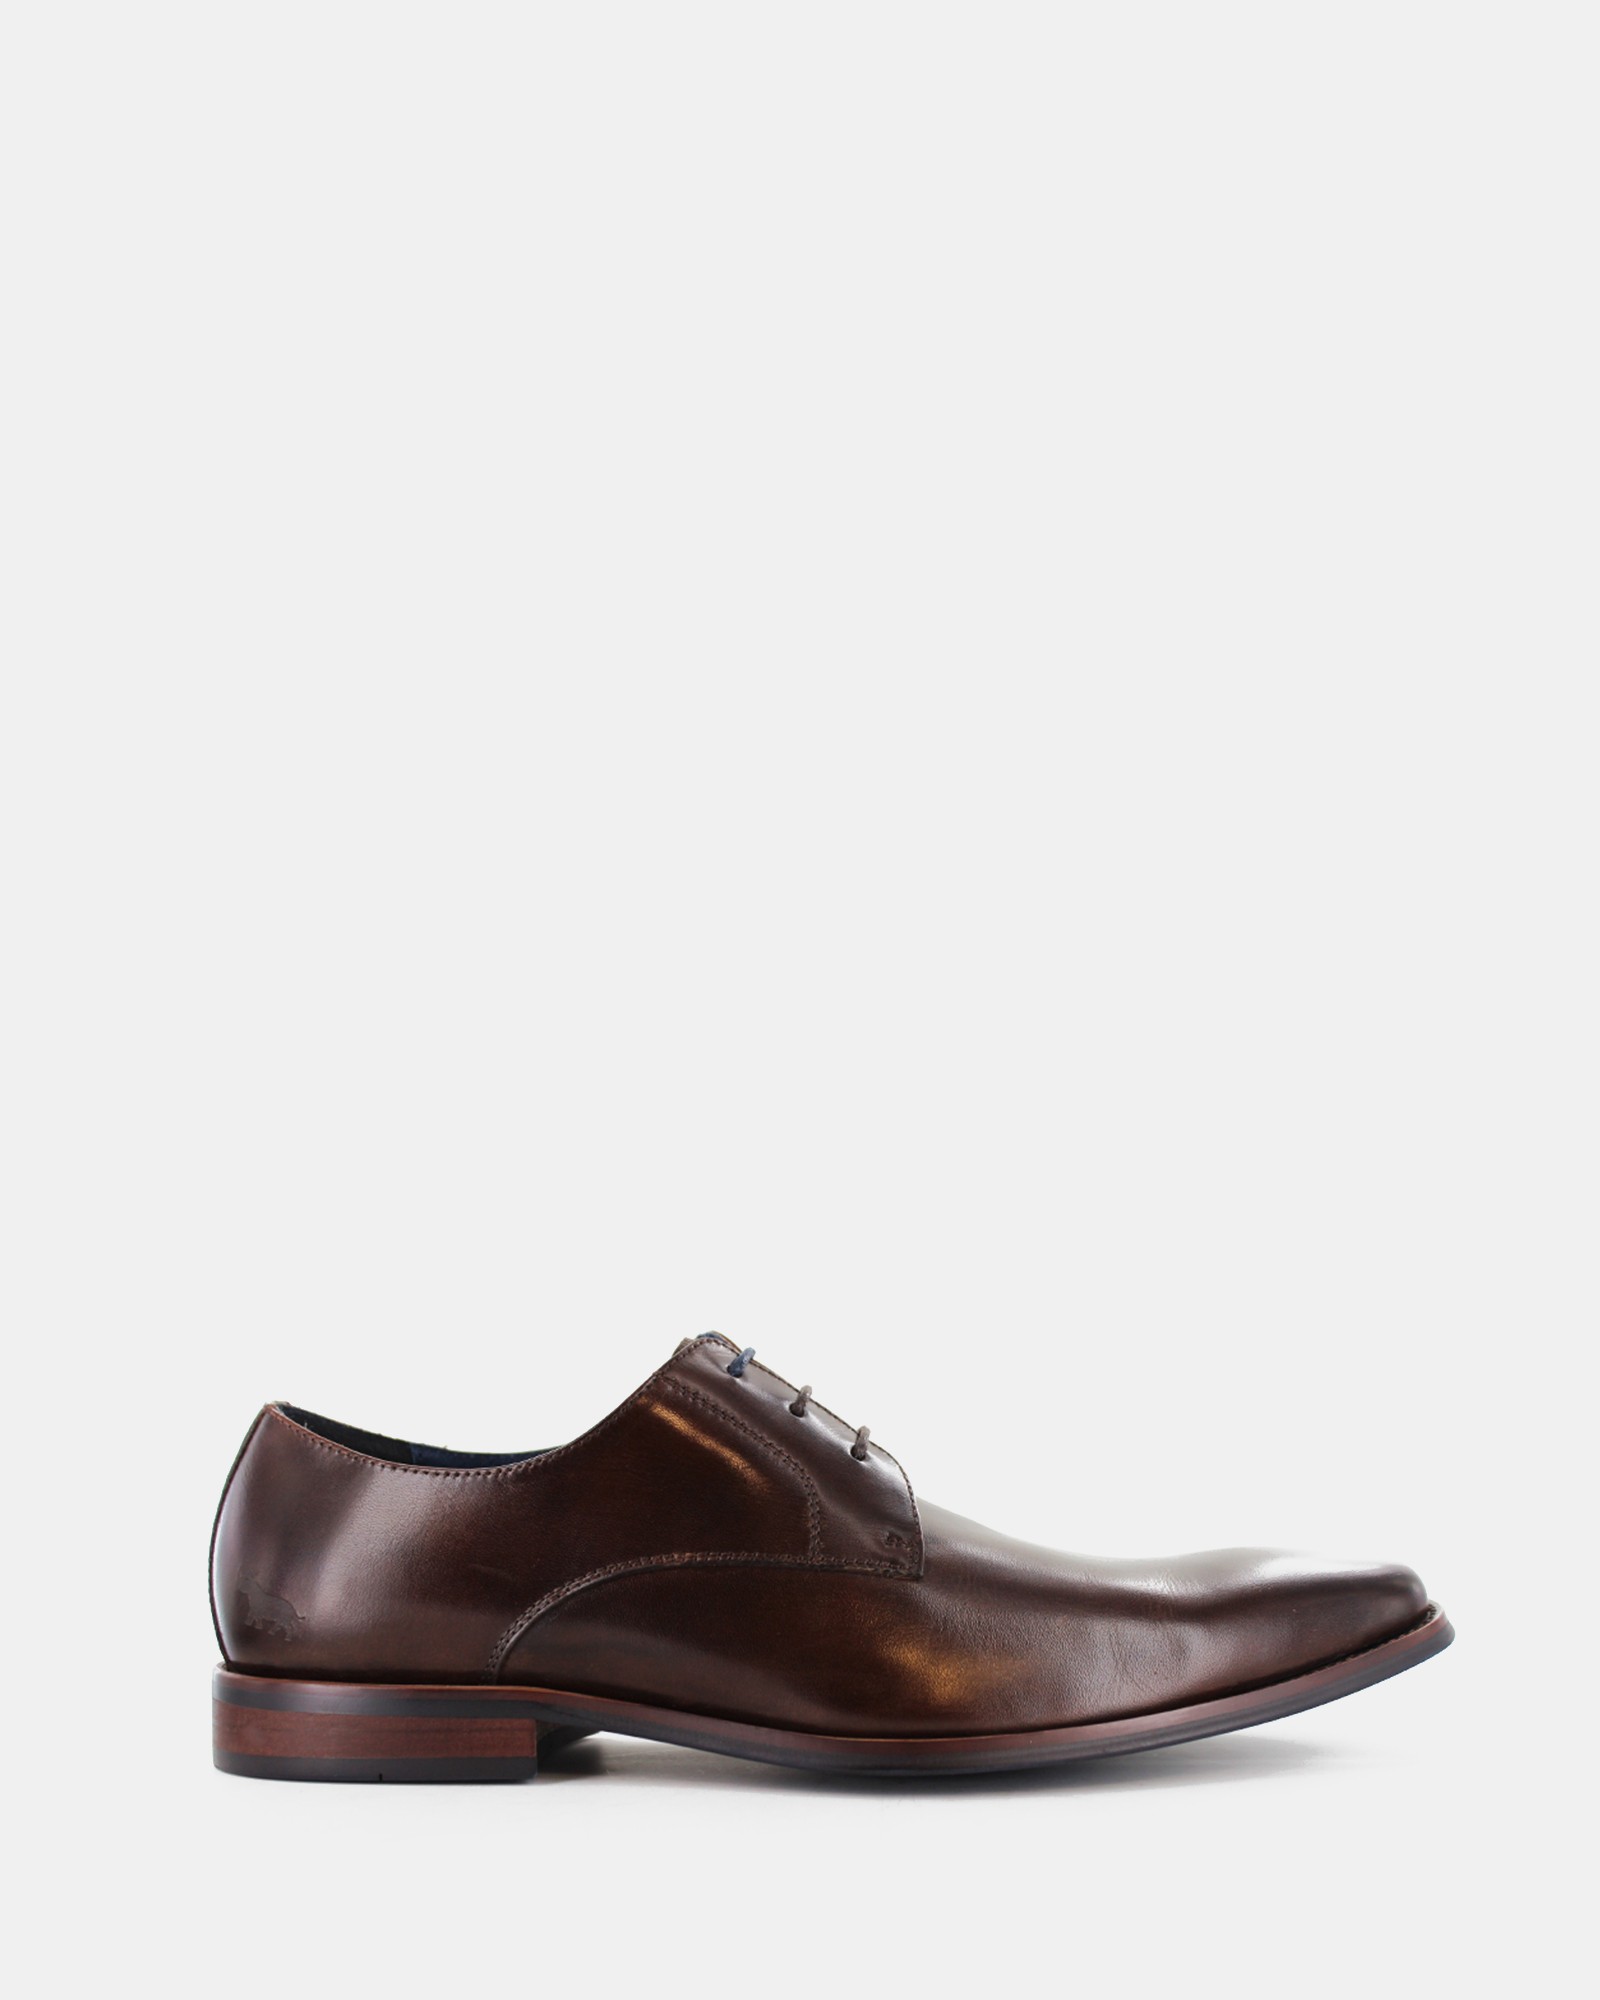 Duval Dress Shoes Dark Brown by Wild Rhino | ShoeSales